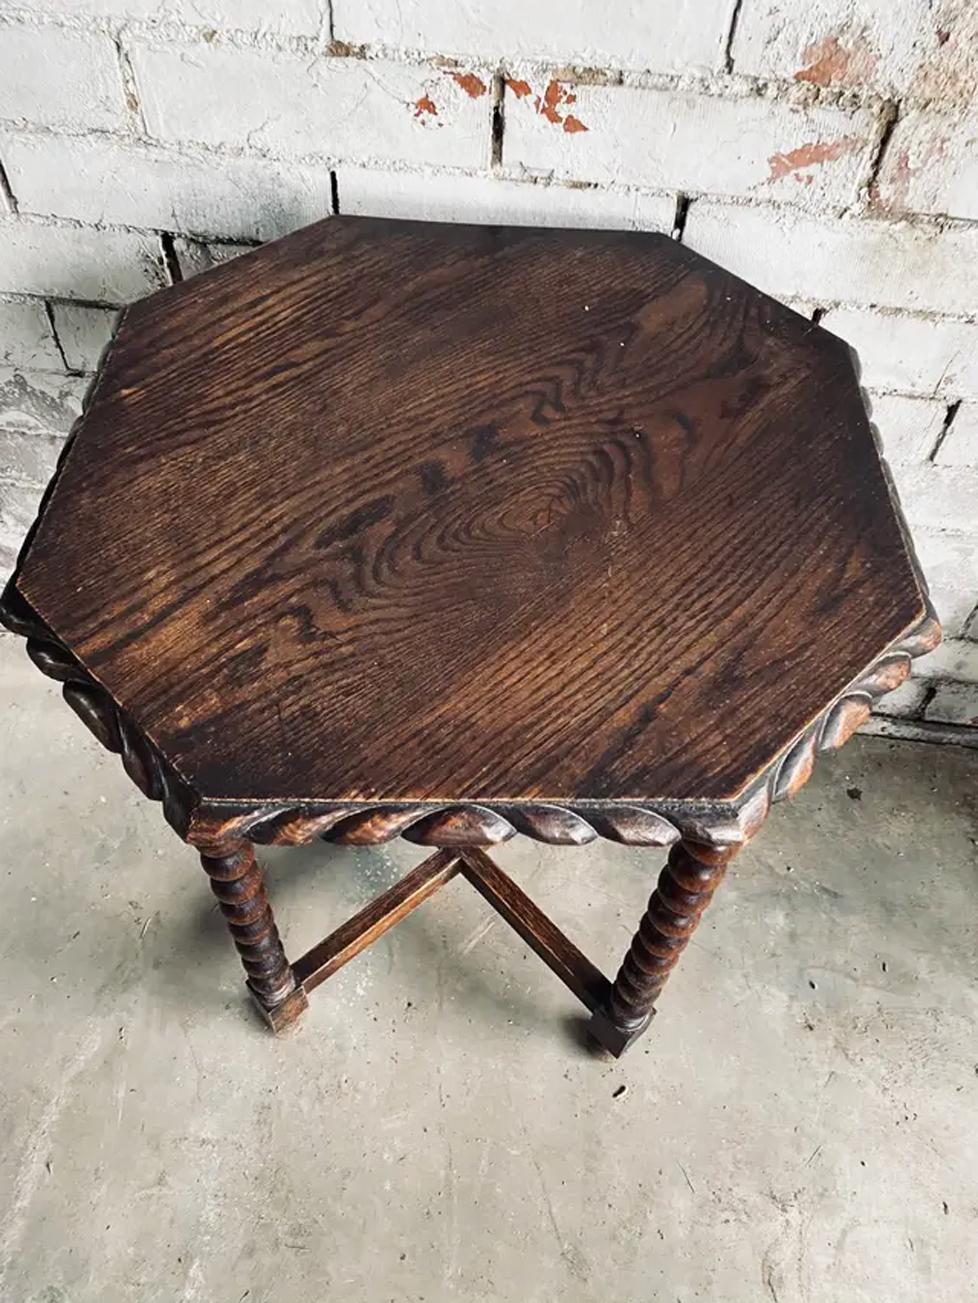 Table able antique of the 19th century wood with features barley twist legs

Solid wood in perfect condition, beautiful patina

This table is raised on a base composed of four turned legs and a cross-shaped stretcher, also turned

Castilian or